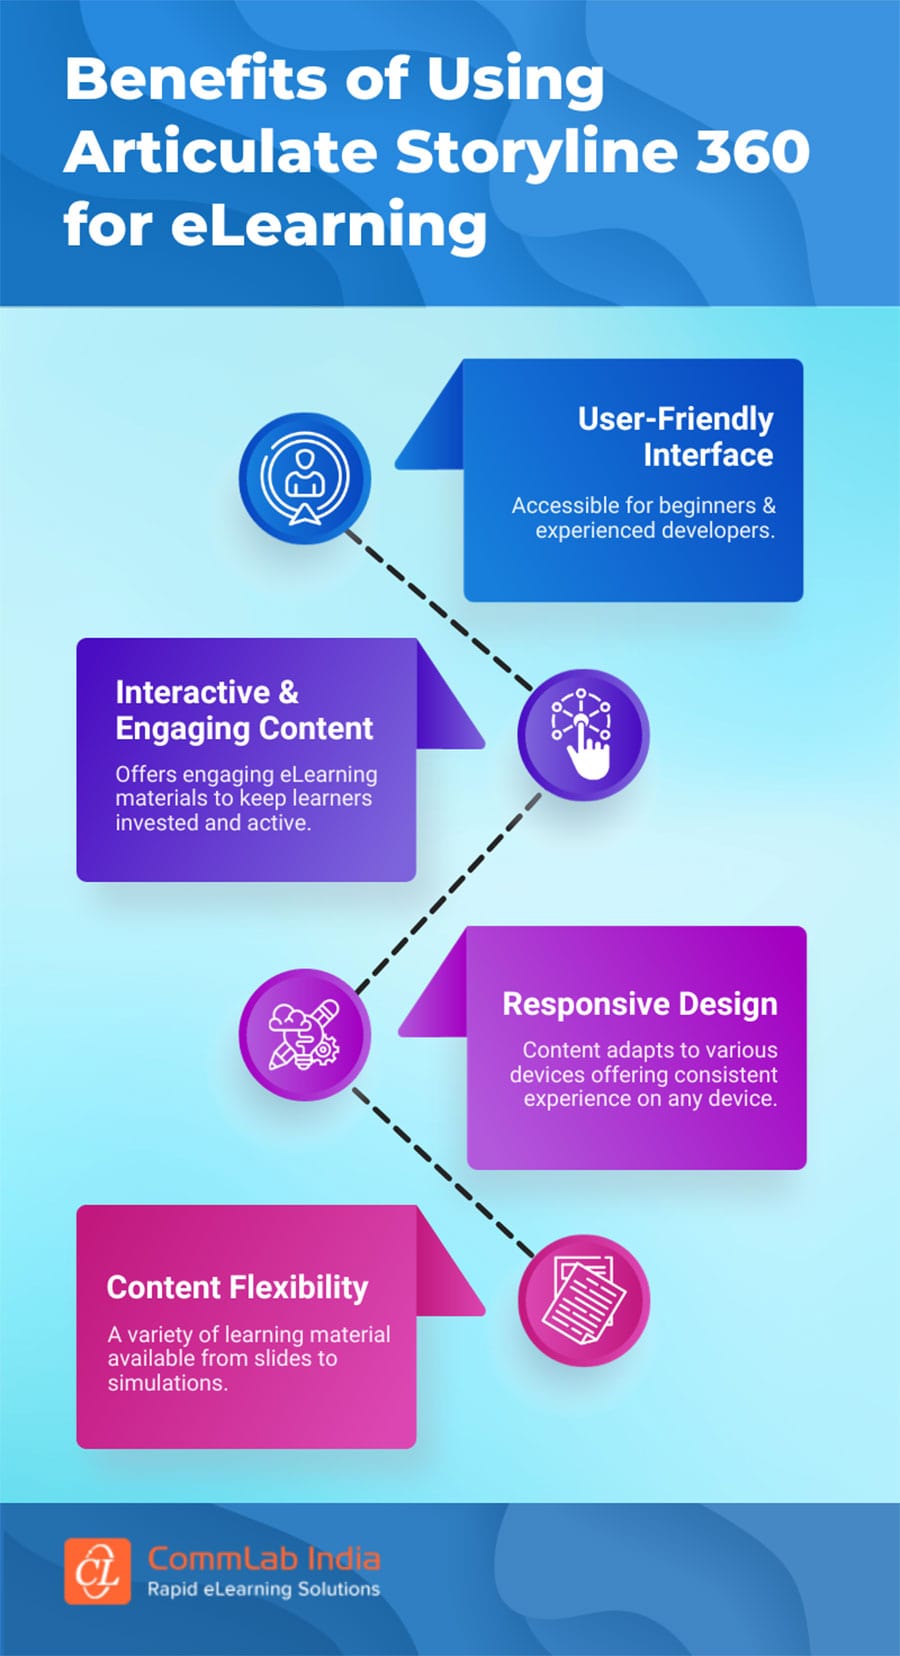 Features of Articulate Storyline 360